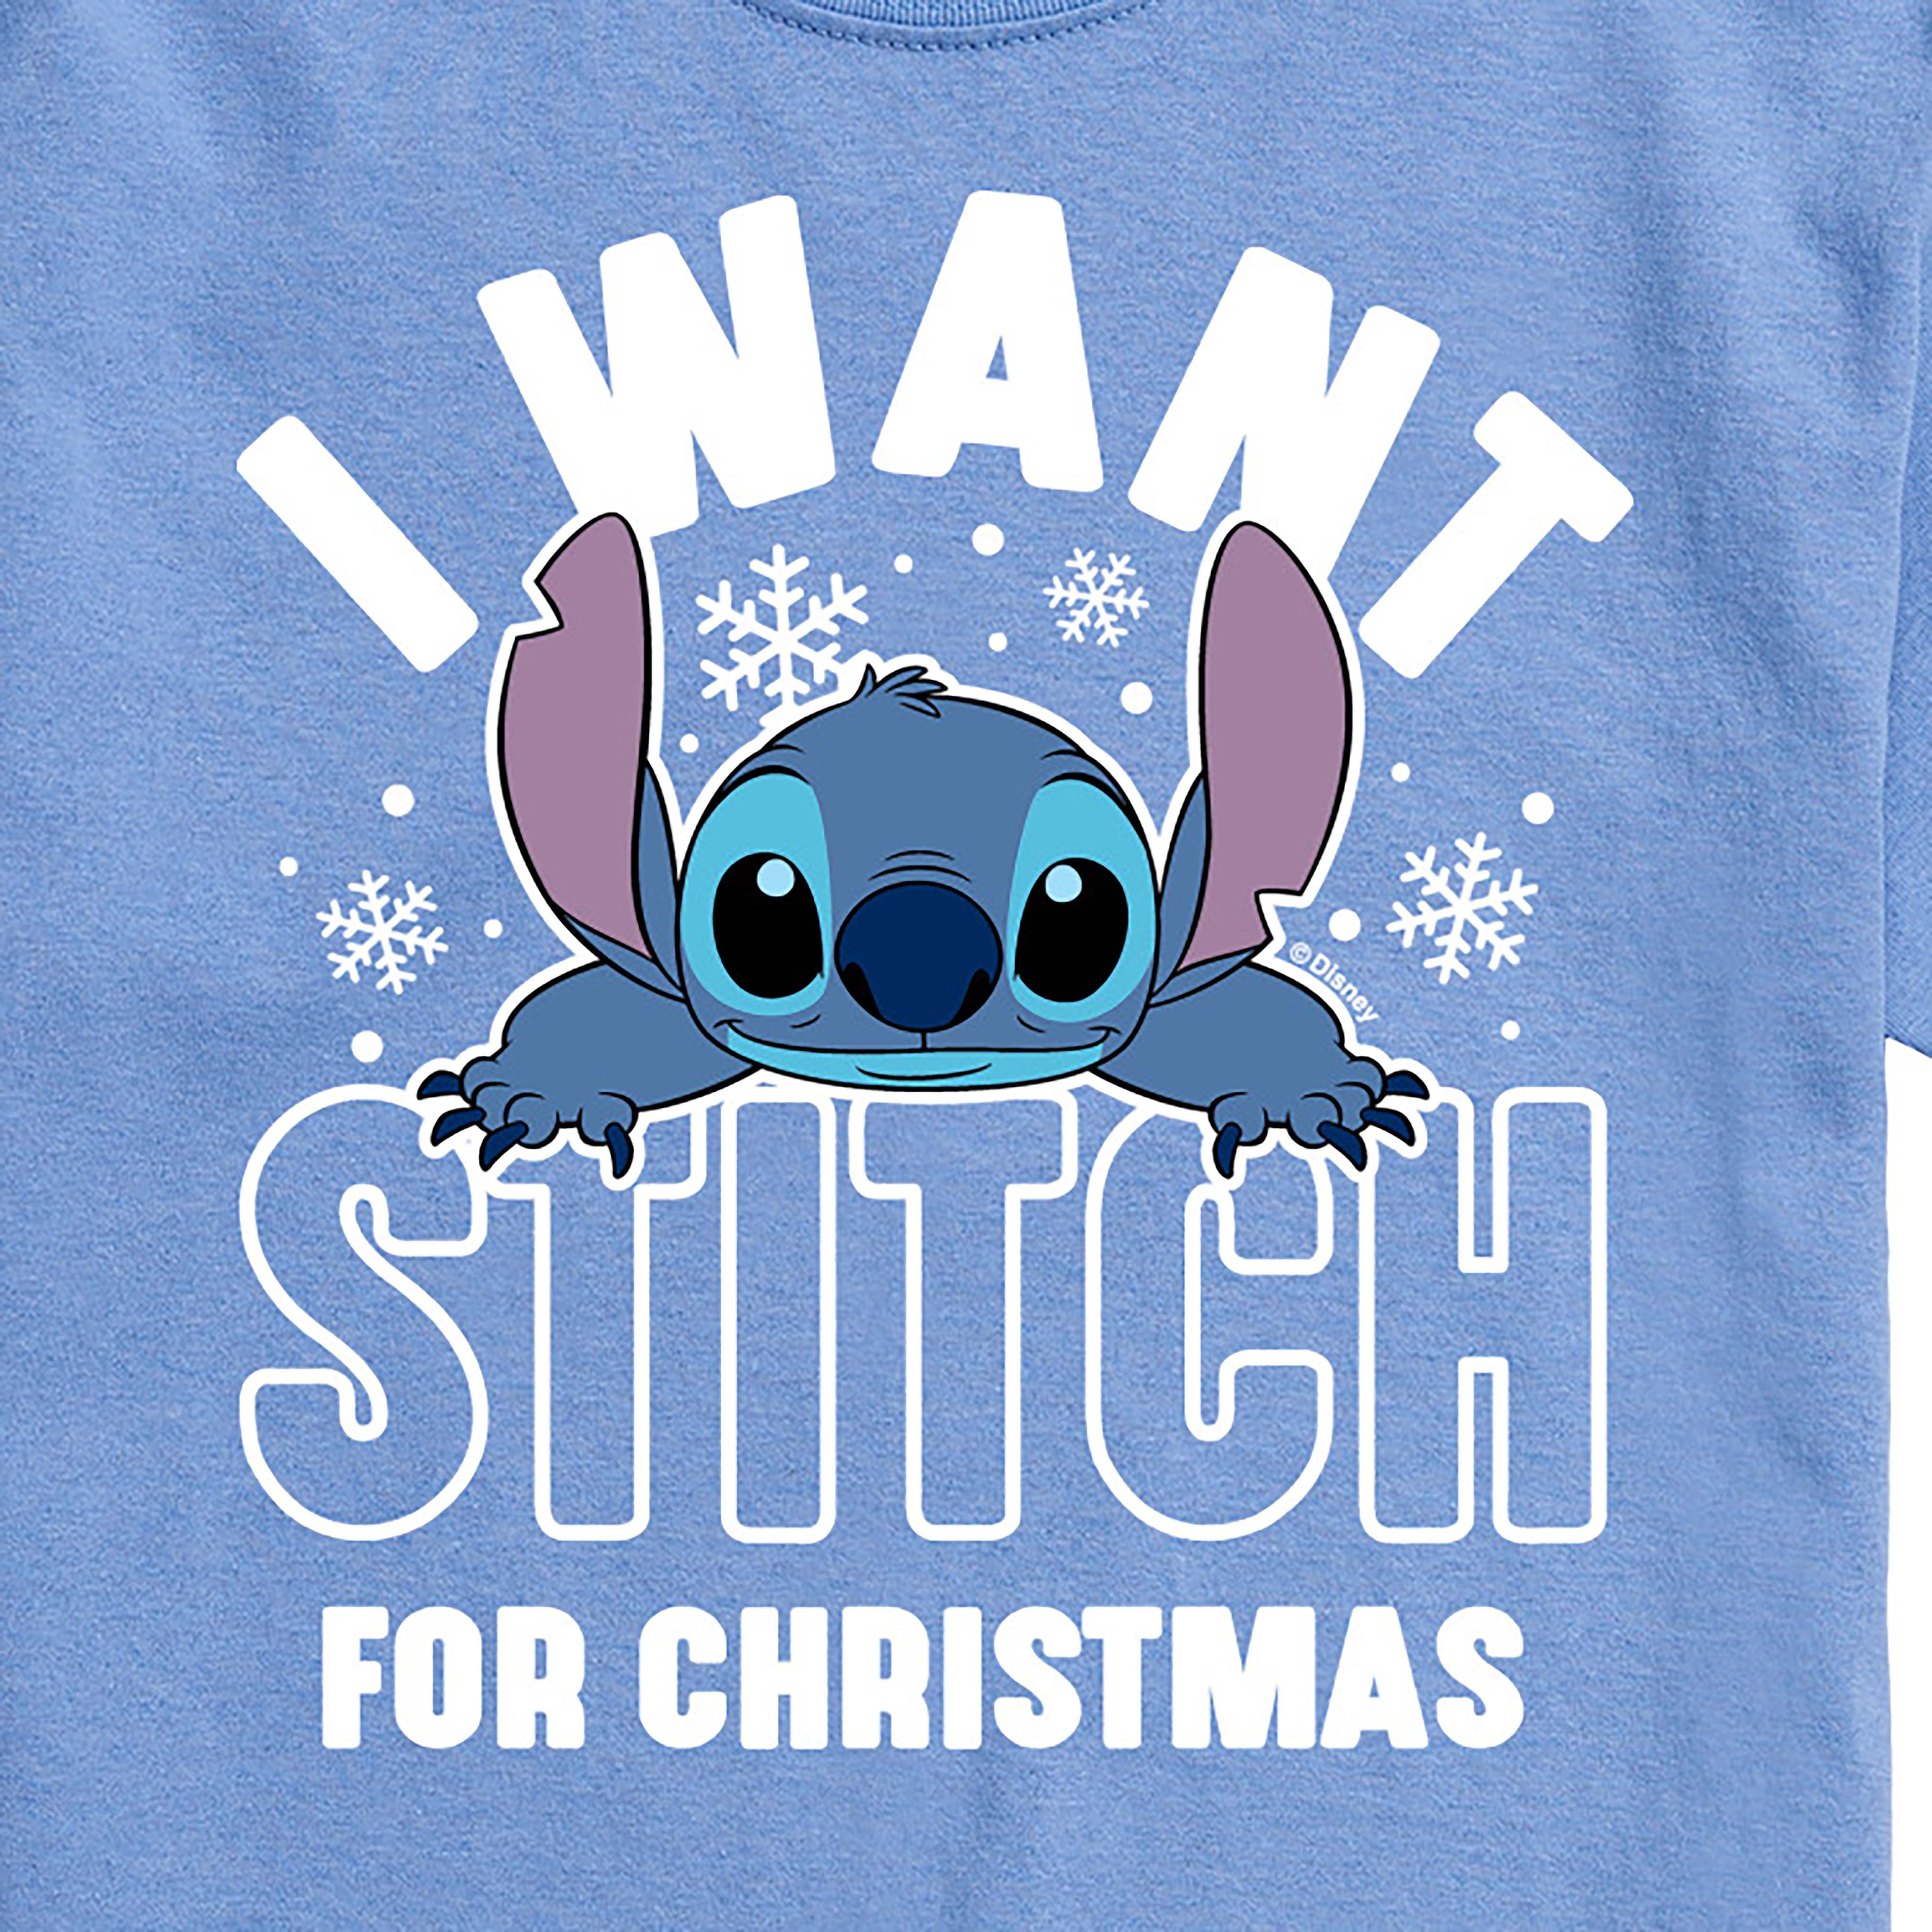 Lilo and Stitch Men's Short Sleeve T-Shirt Tee Funny Cotton Tops Birthday  Christmas Gift for Boys and GirlsValentine's Day Gift,Mother's Day  Gift,Christmas gifts,New Year Gift 